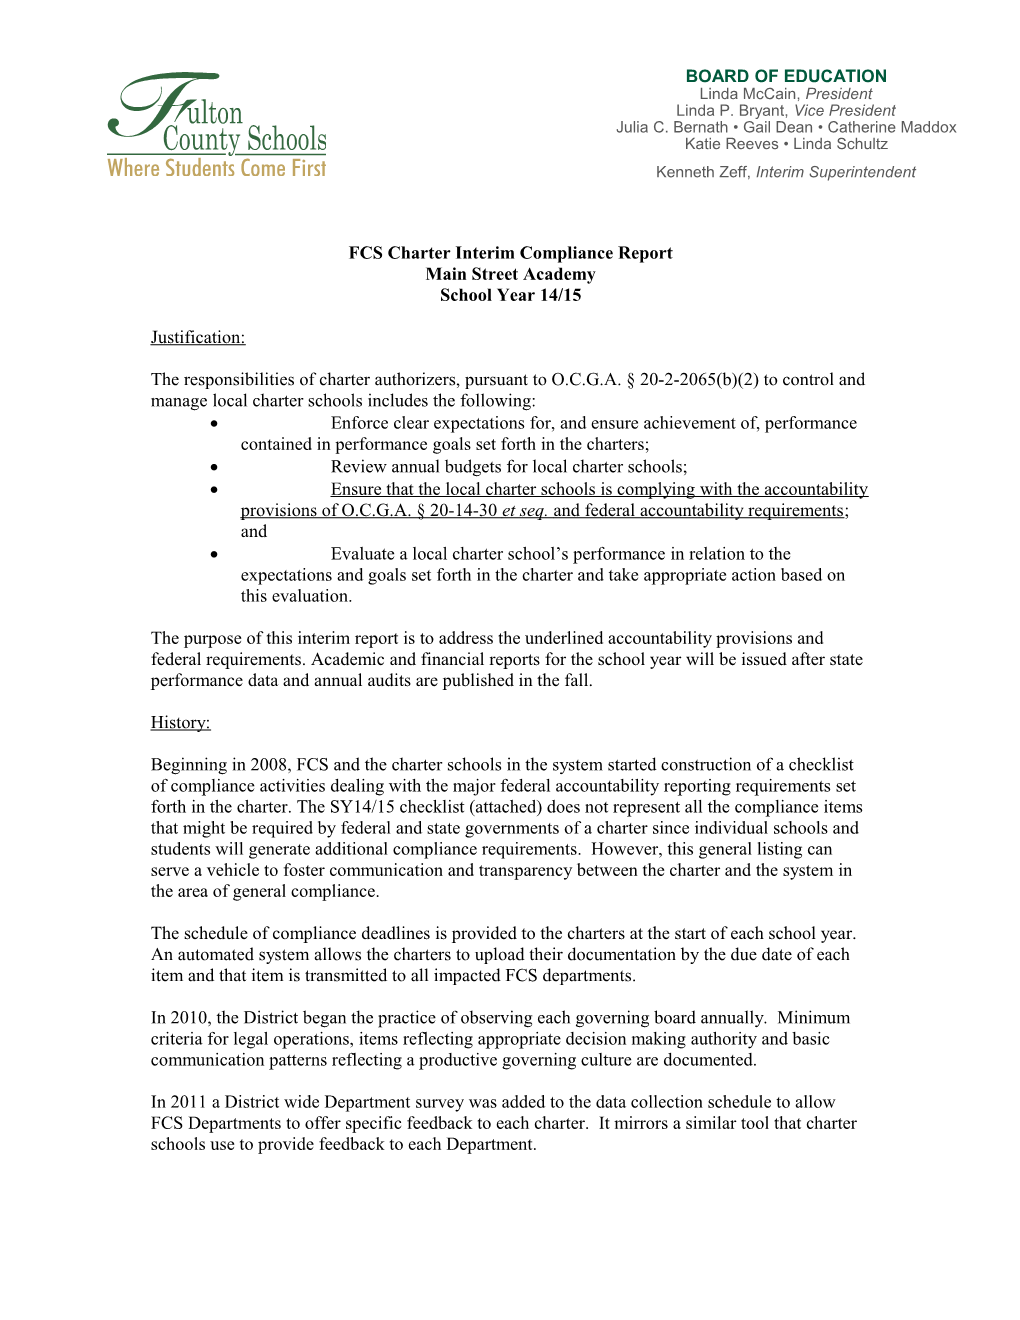 FCS Charter Quarterly Compliance Report